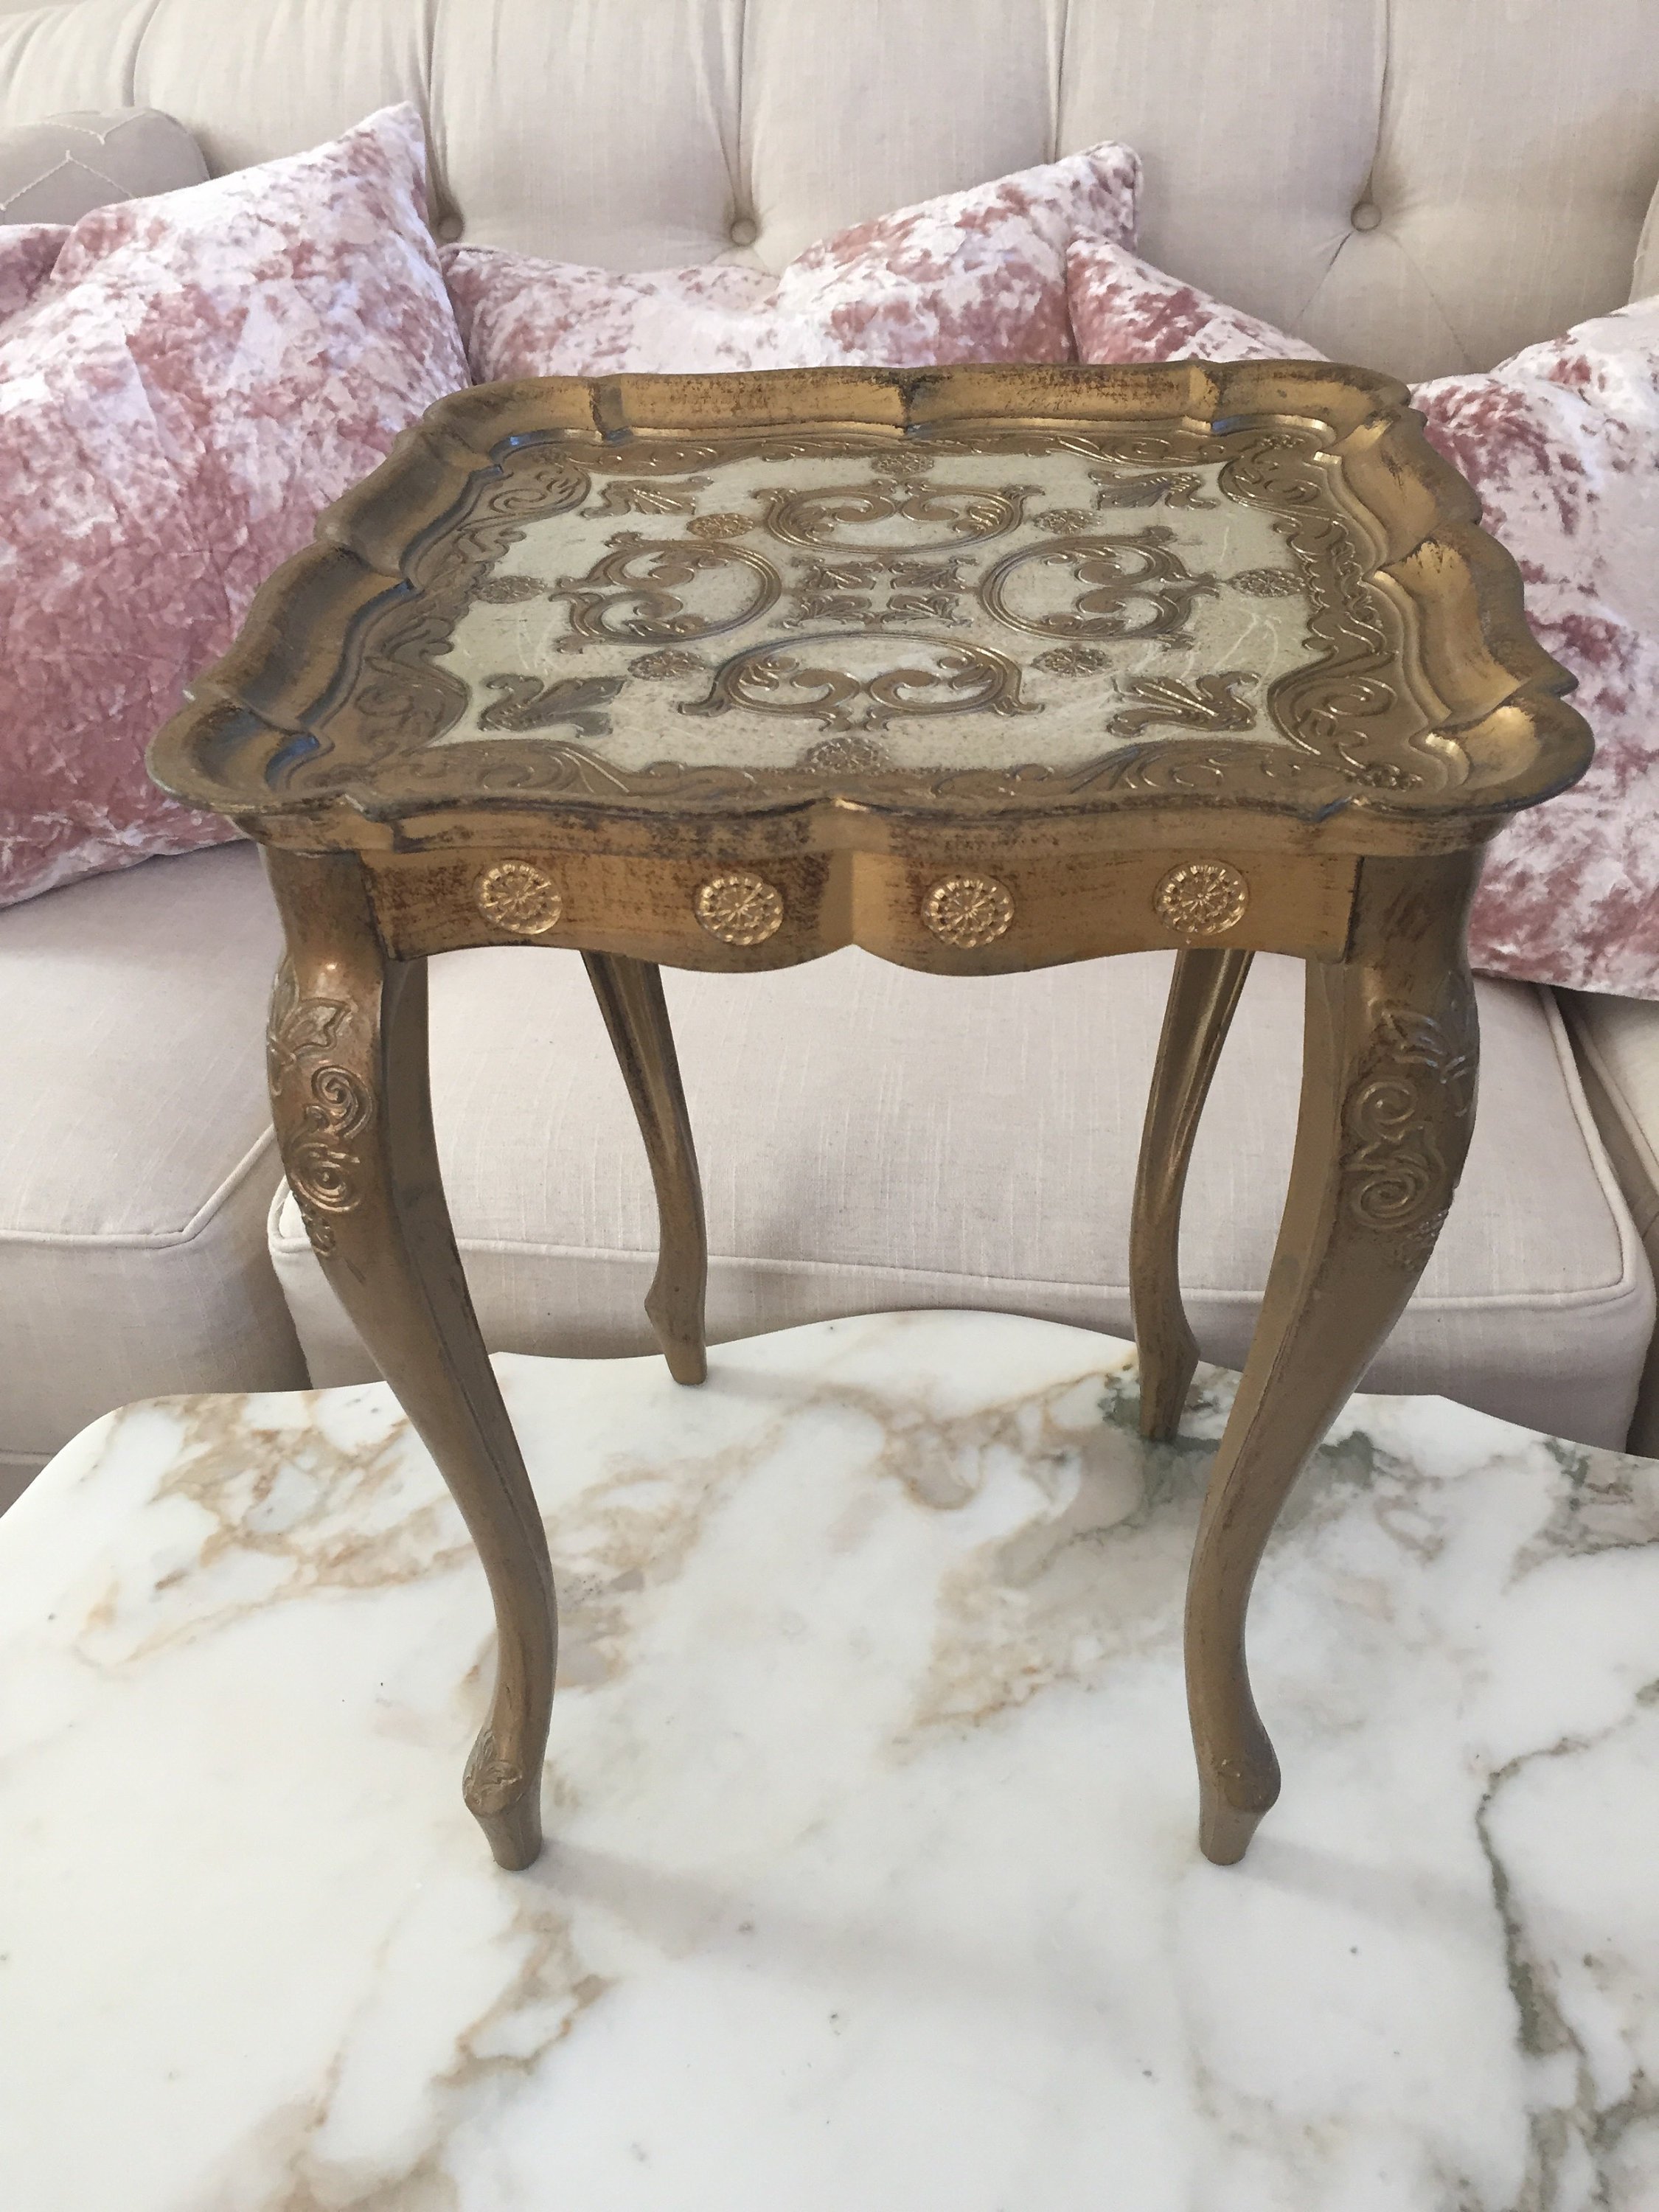 Etsy - Small Italian Florentine Plastic Table Golden Side End Accent